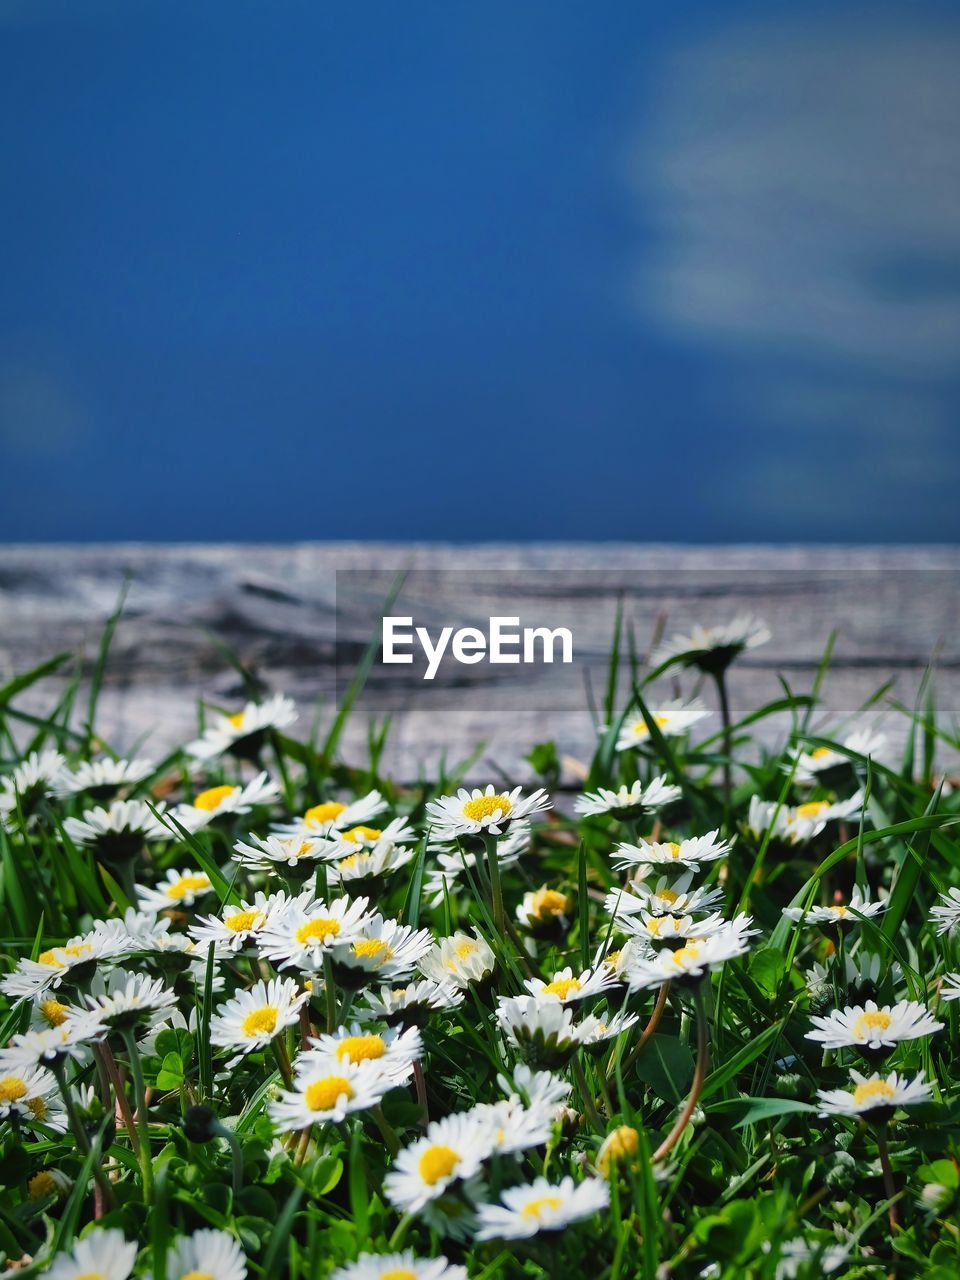 plant, flower, flowering plant, nature, grass, beauty in nature, freshness, sky, meadow, field, land, growth, no people, daisy, fragility, sunlight, water, day, wildflower, close-up, white, outdoors, tranquility, springtime, scenics - nature, landscape, sea, yellow, green, focus on foreground, environment, selective focus, blue, flower head, cloud